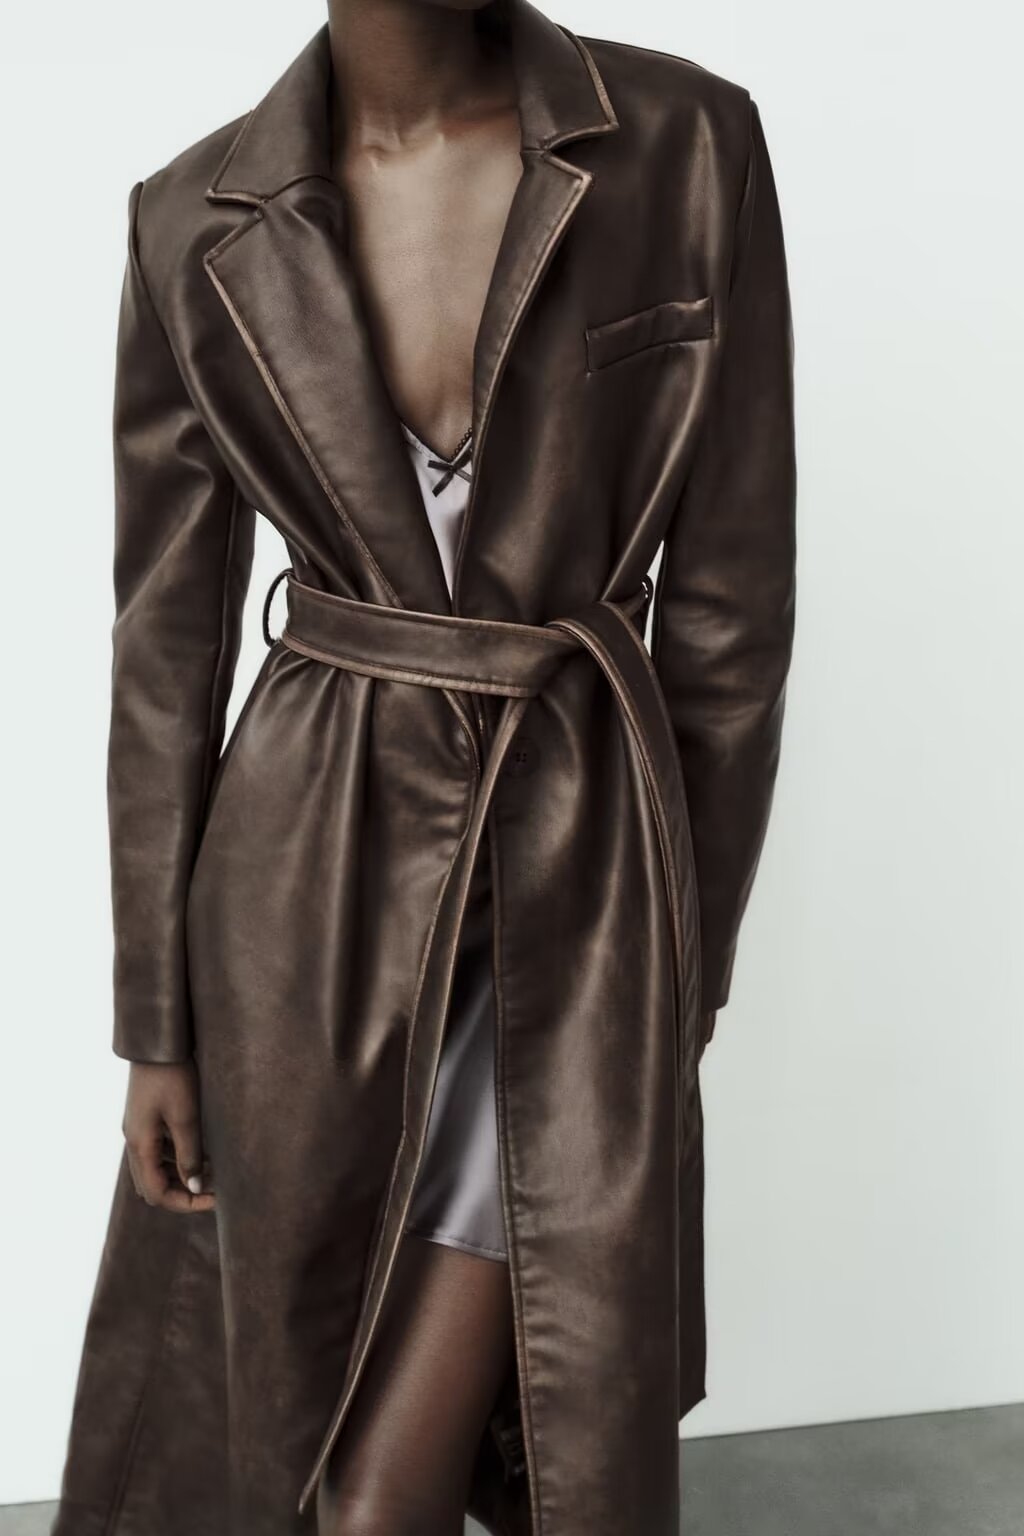 Coat: Distressed Effect Leather